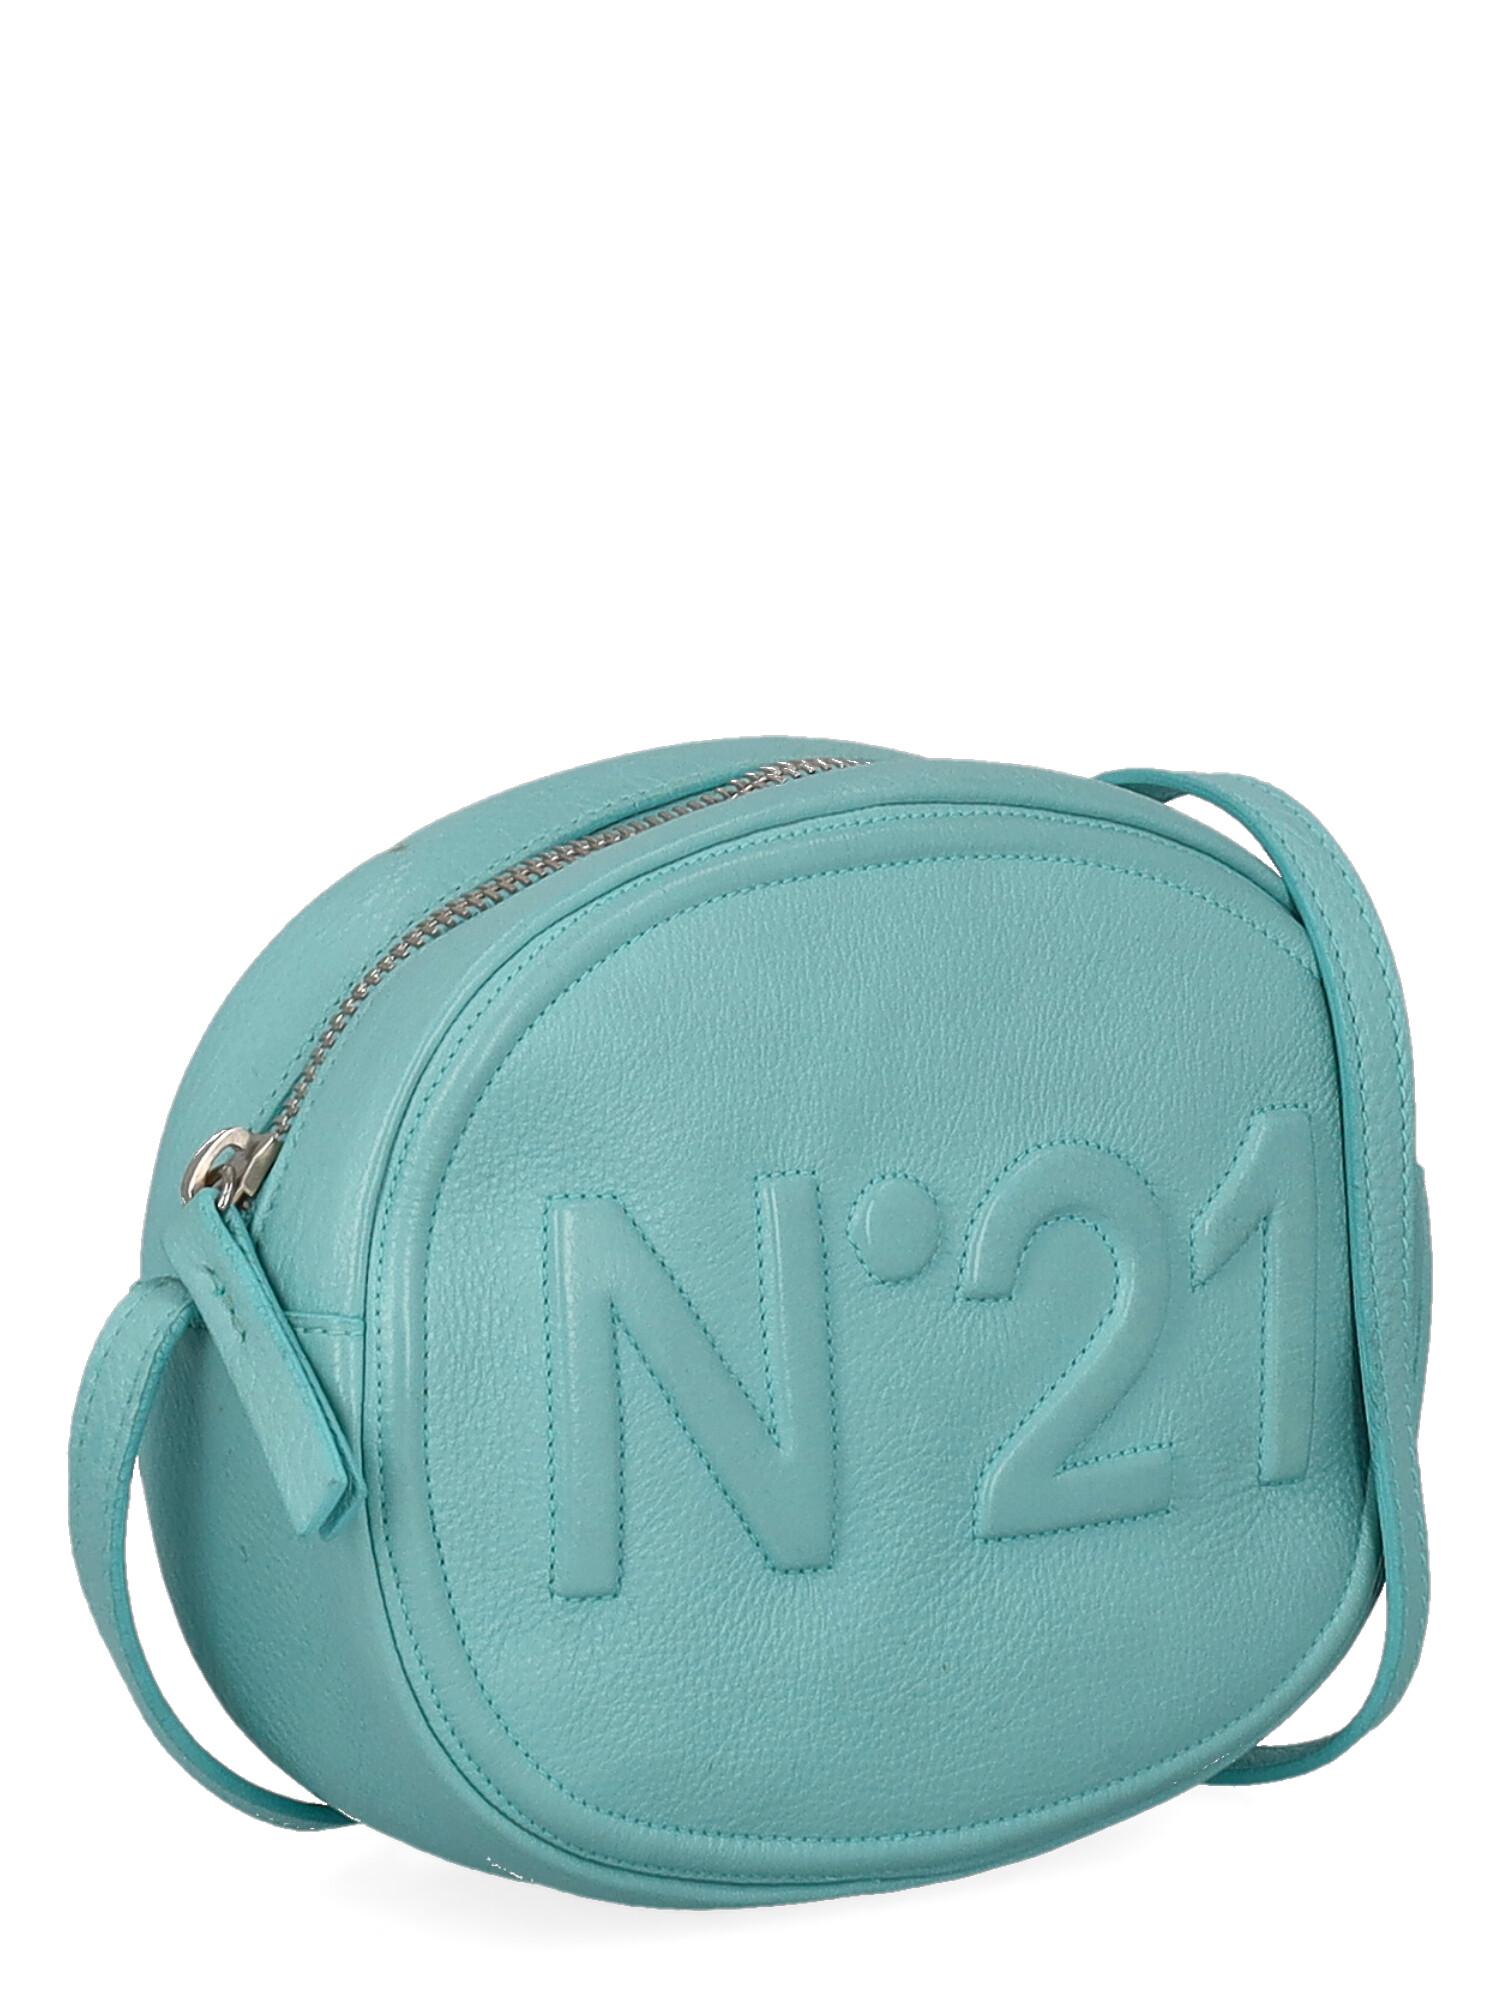 N 21 Women Shoulder bags Blue Leather  In Good Condition For Sale In Milan, IT